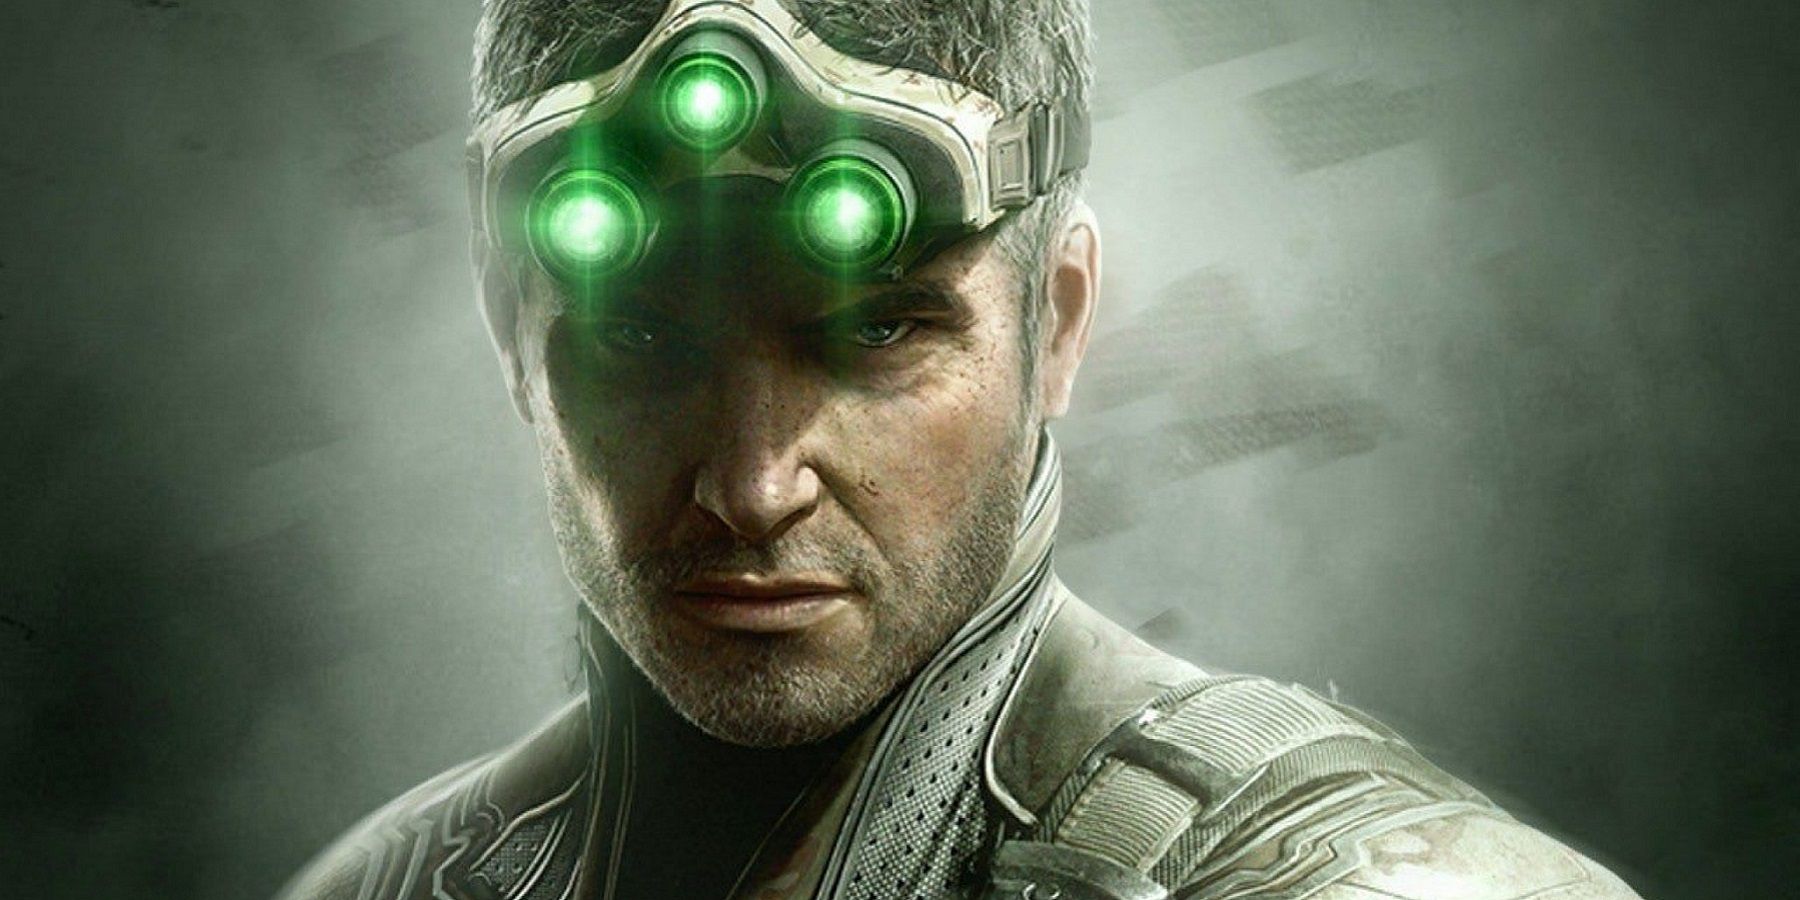 Image from Splinter Cell showing a close-up of Sam Fisher wearing his trademark goggles.